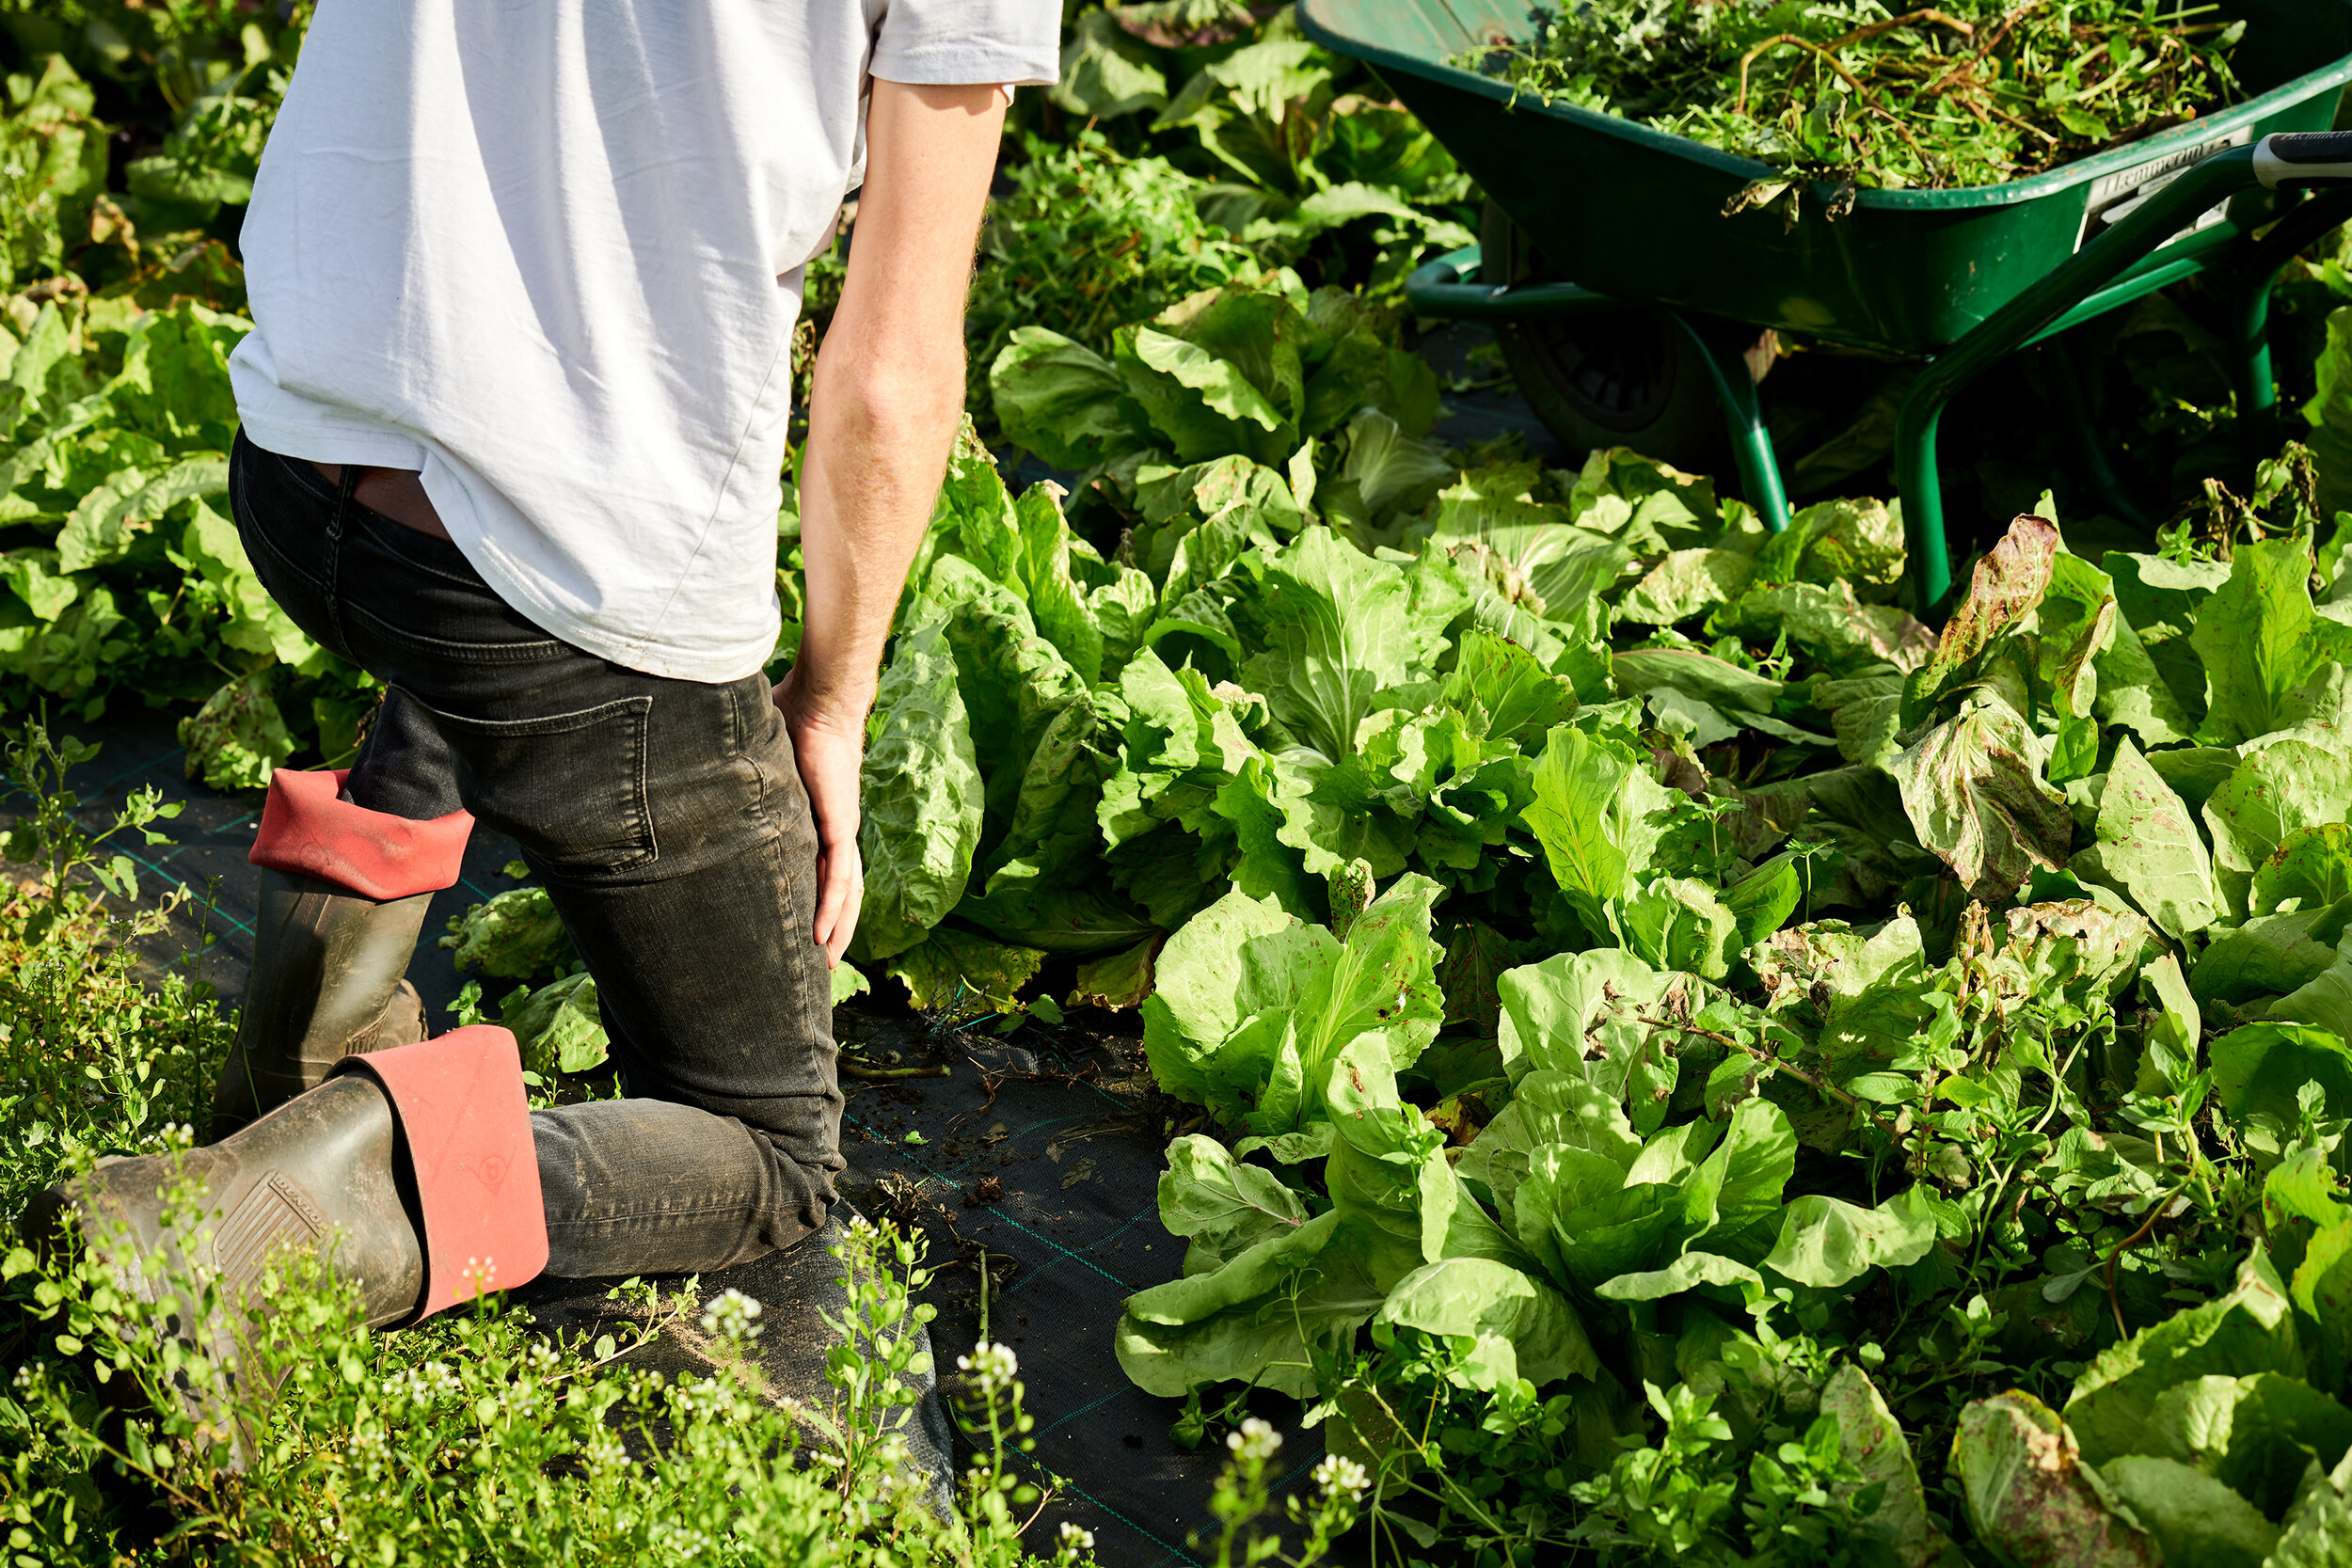 Man working on an urban farm - commercial photography